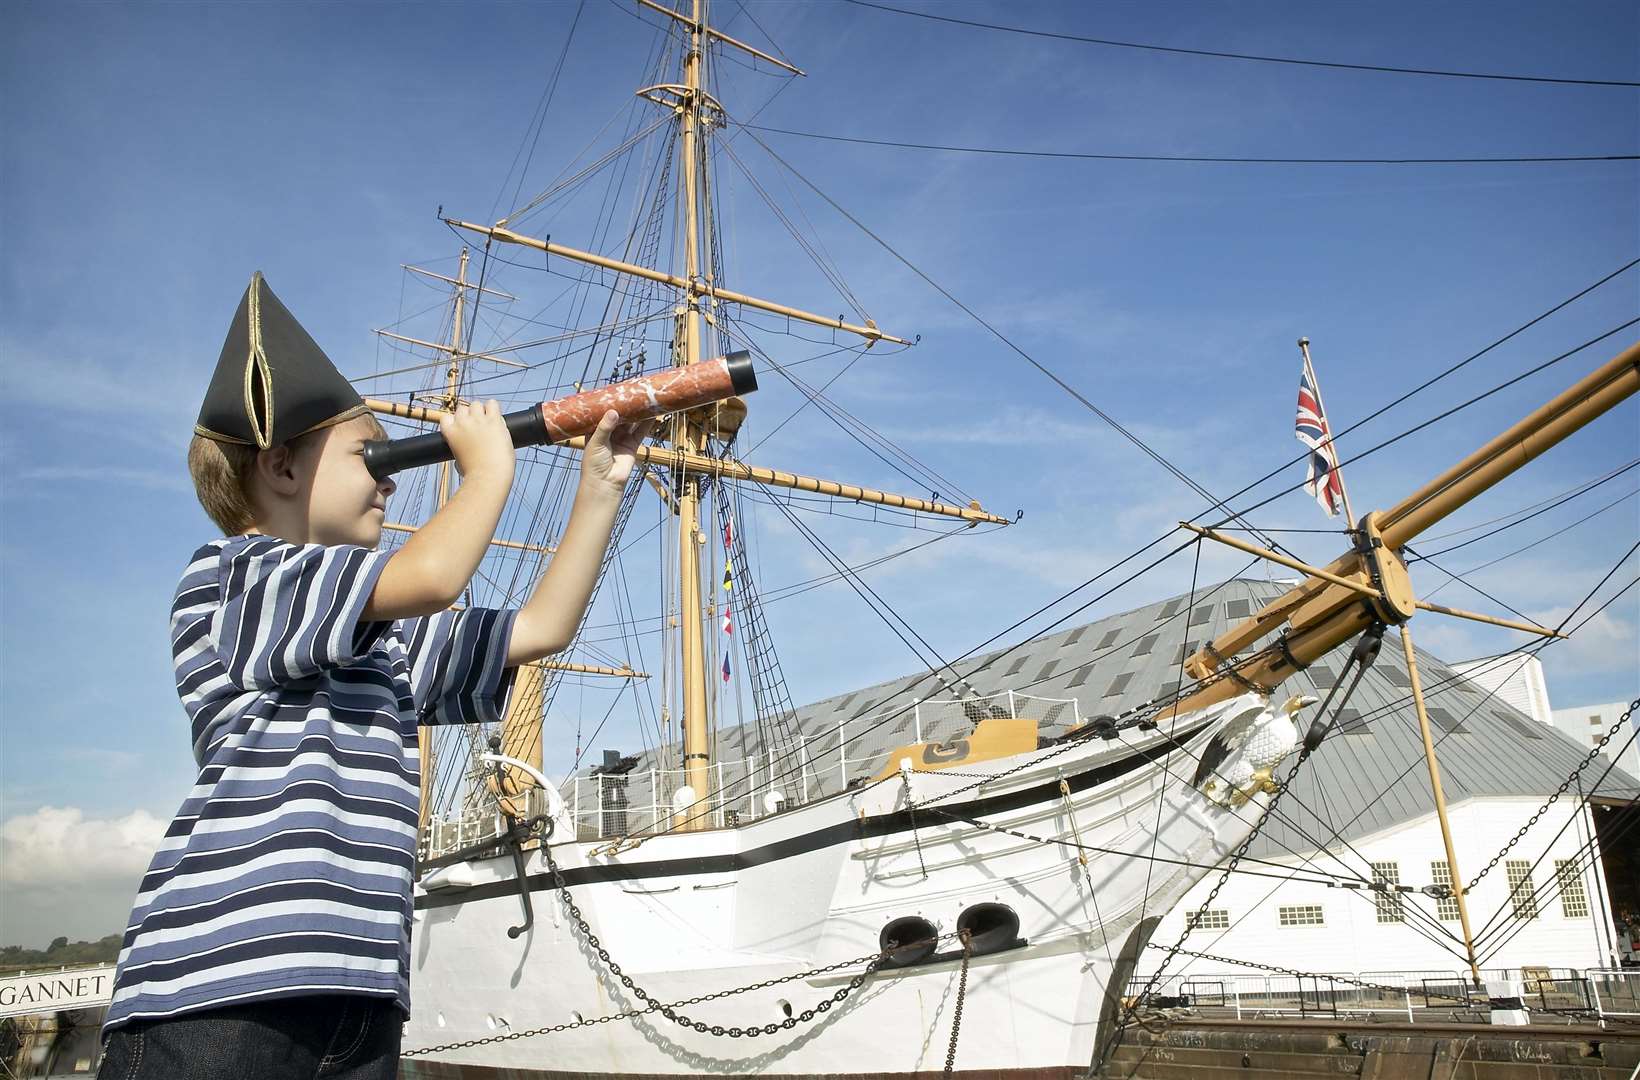 Chatham dockyard is one of the attractions offering tickets